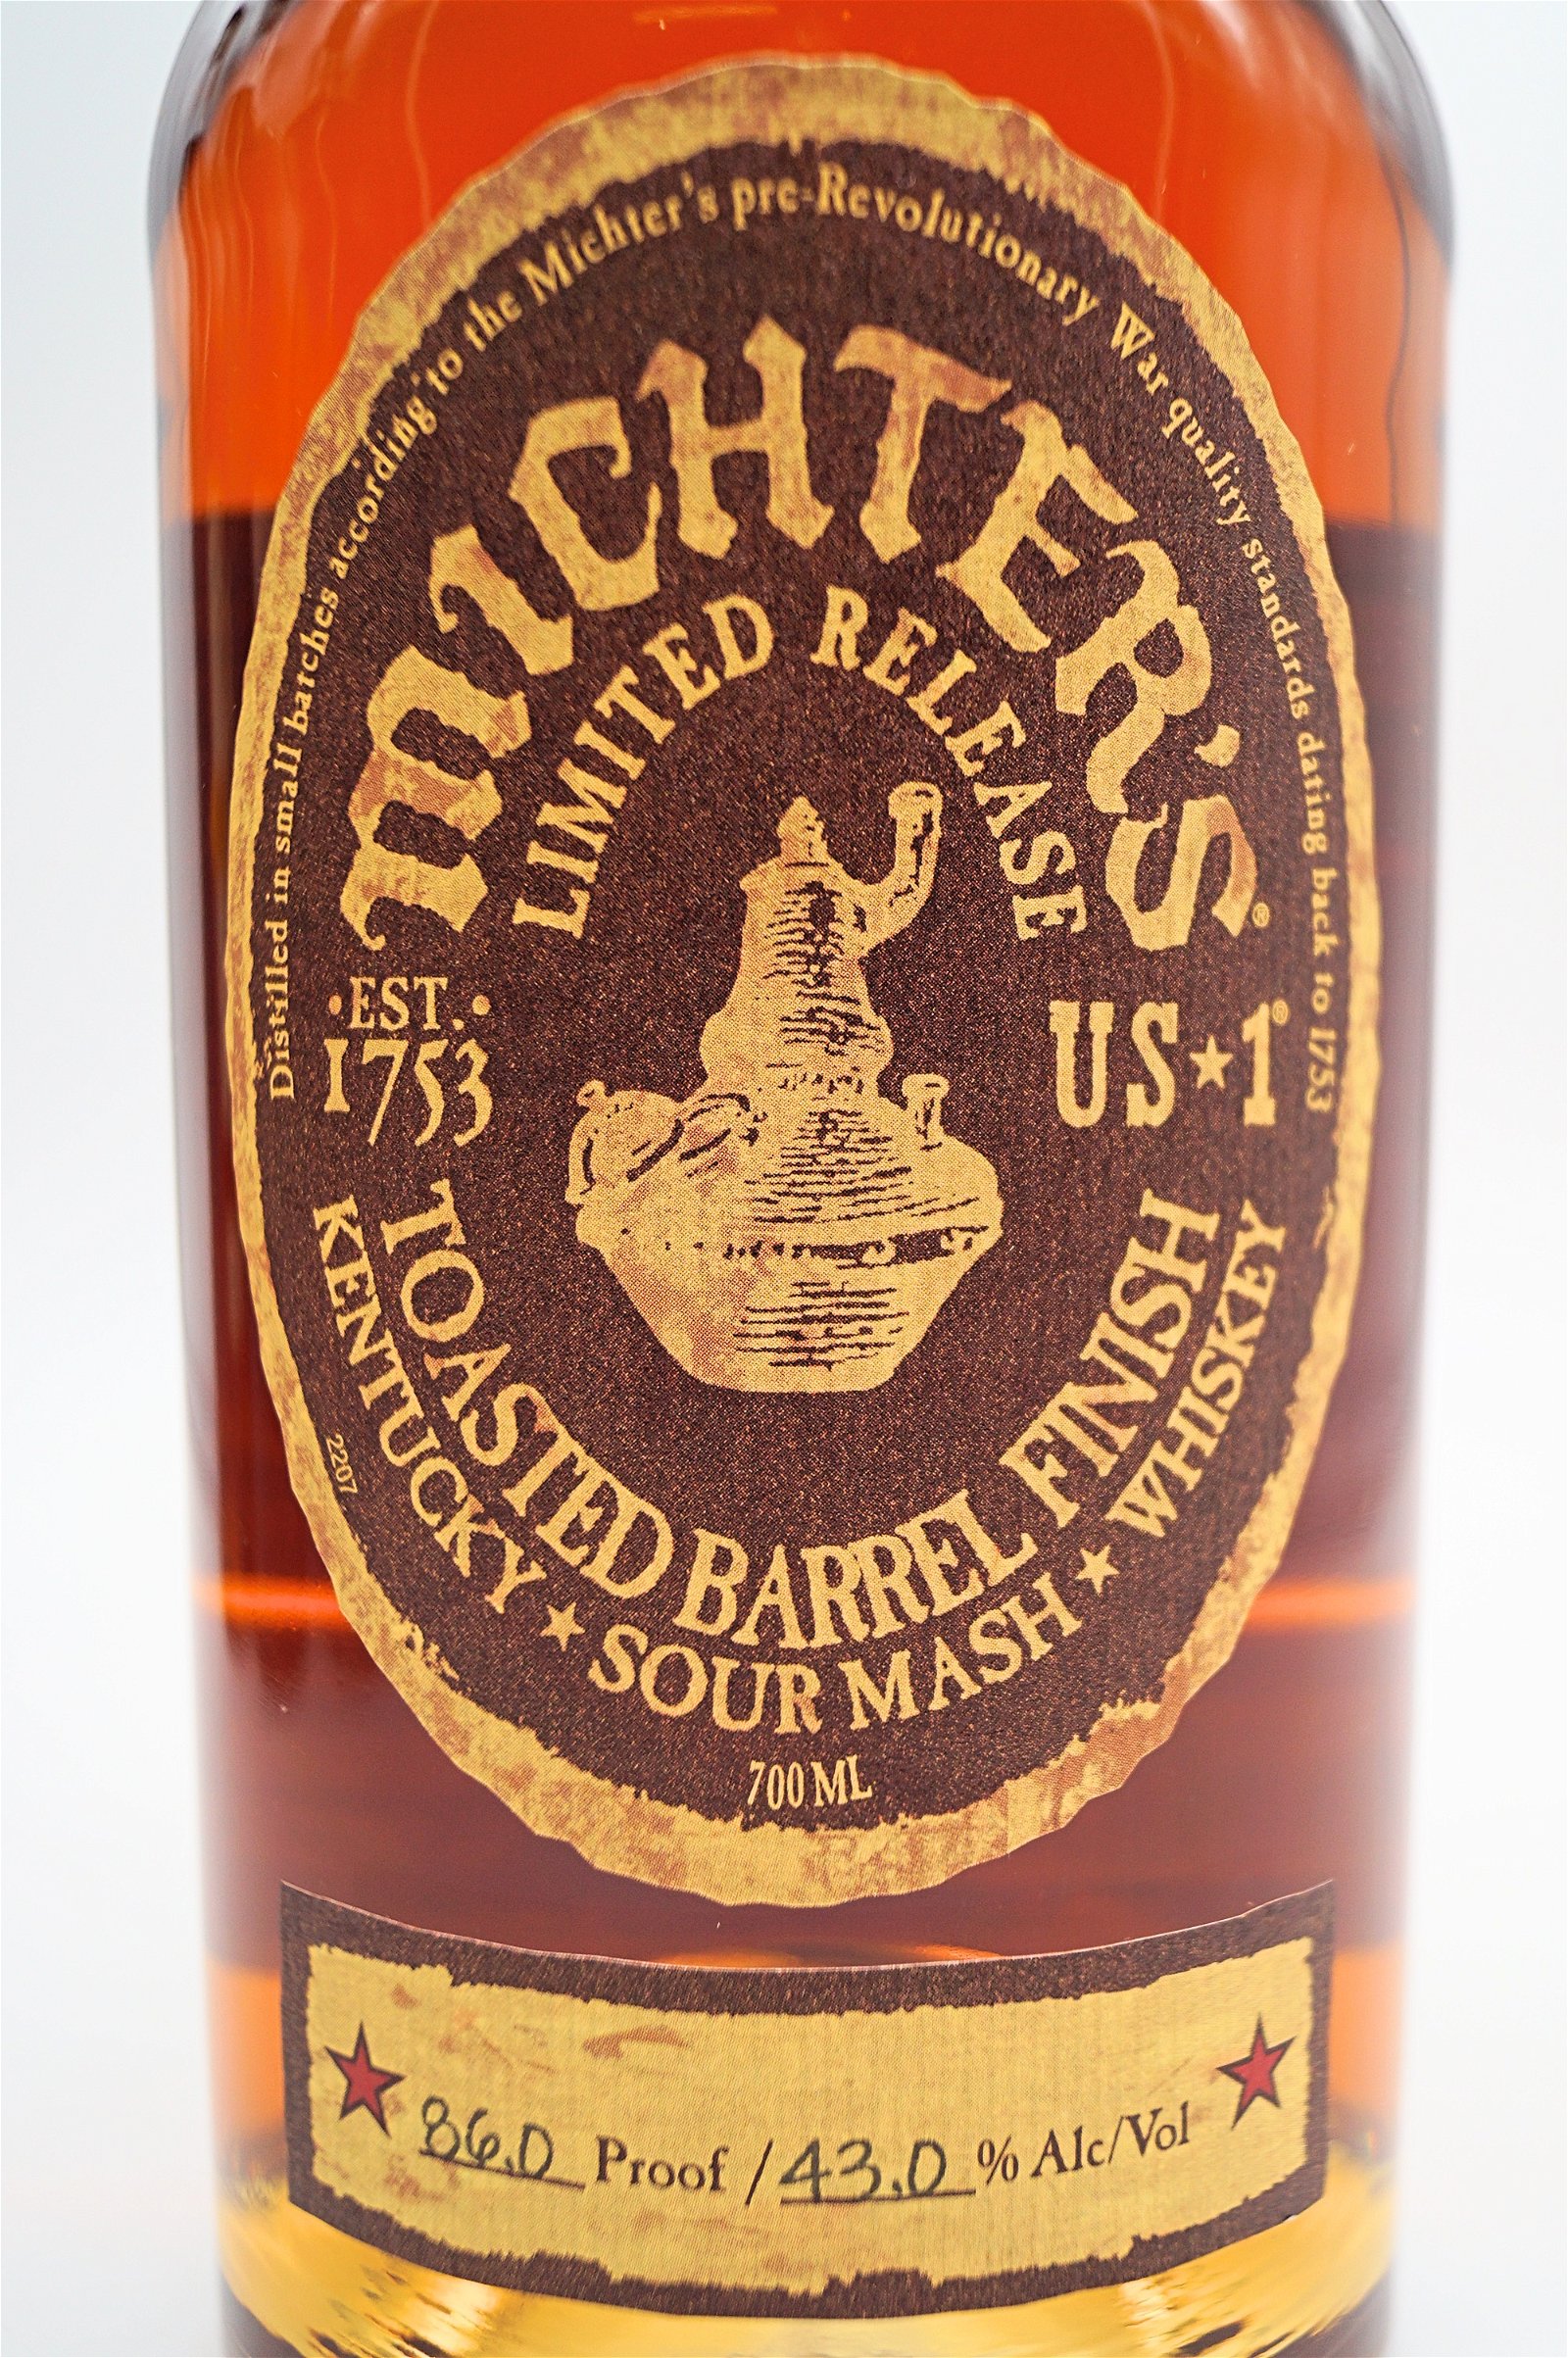 Michter's Toasted Barrel Fin Sour Mash Whiskey